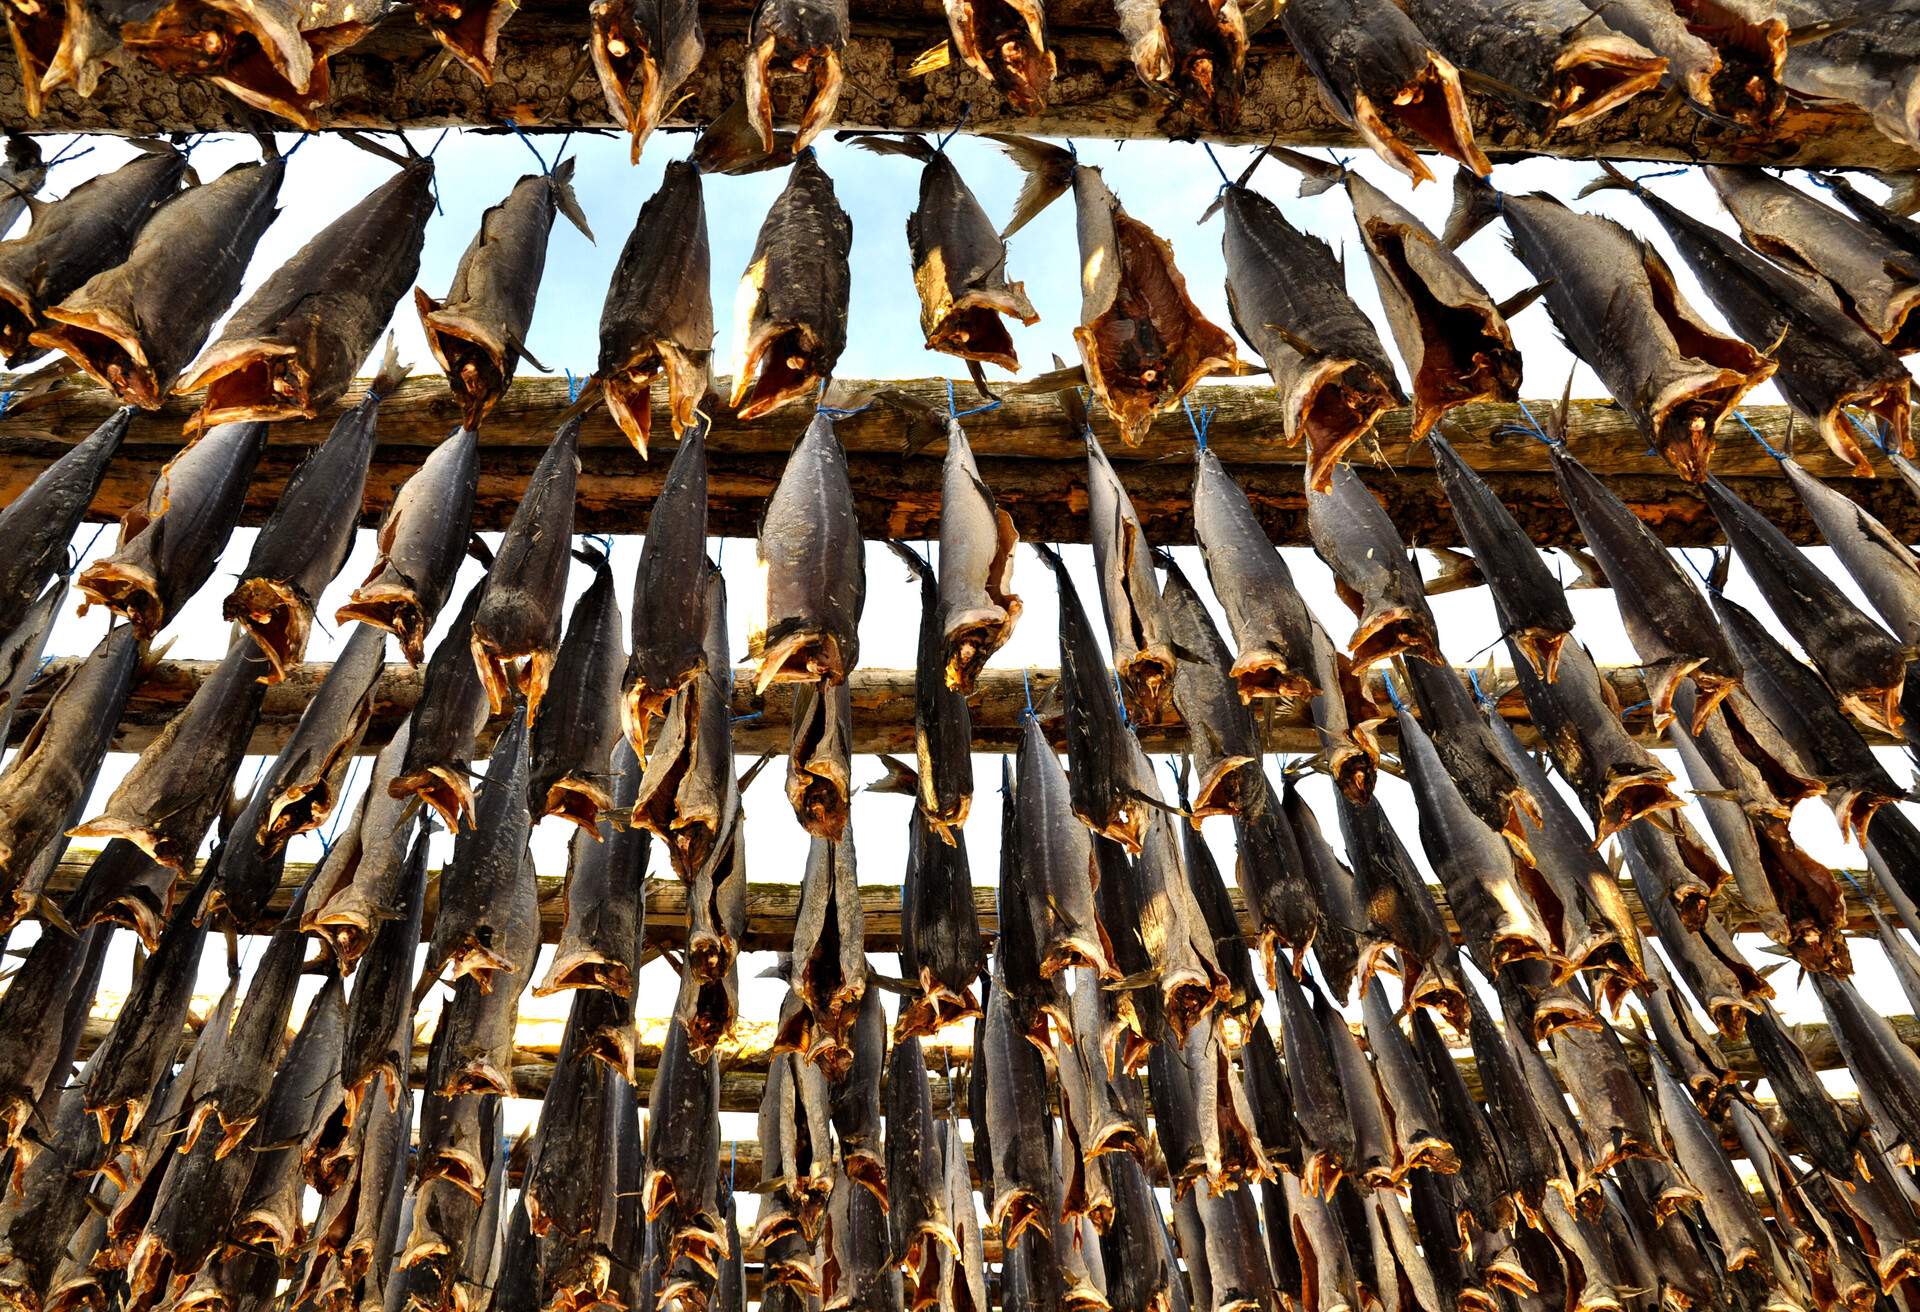 Fish hanging out to dry, Saudárkrókur Iceland, the town Saudarkrokur is largest Cod fish drying trestles in Iceland